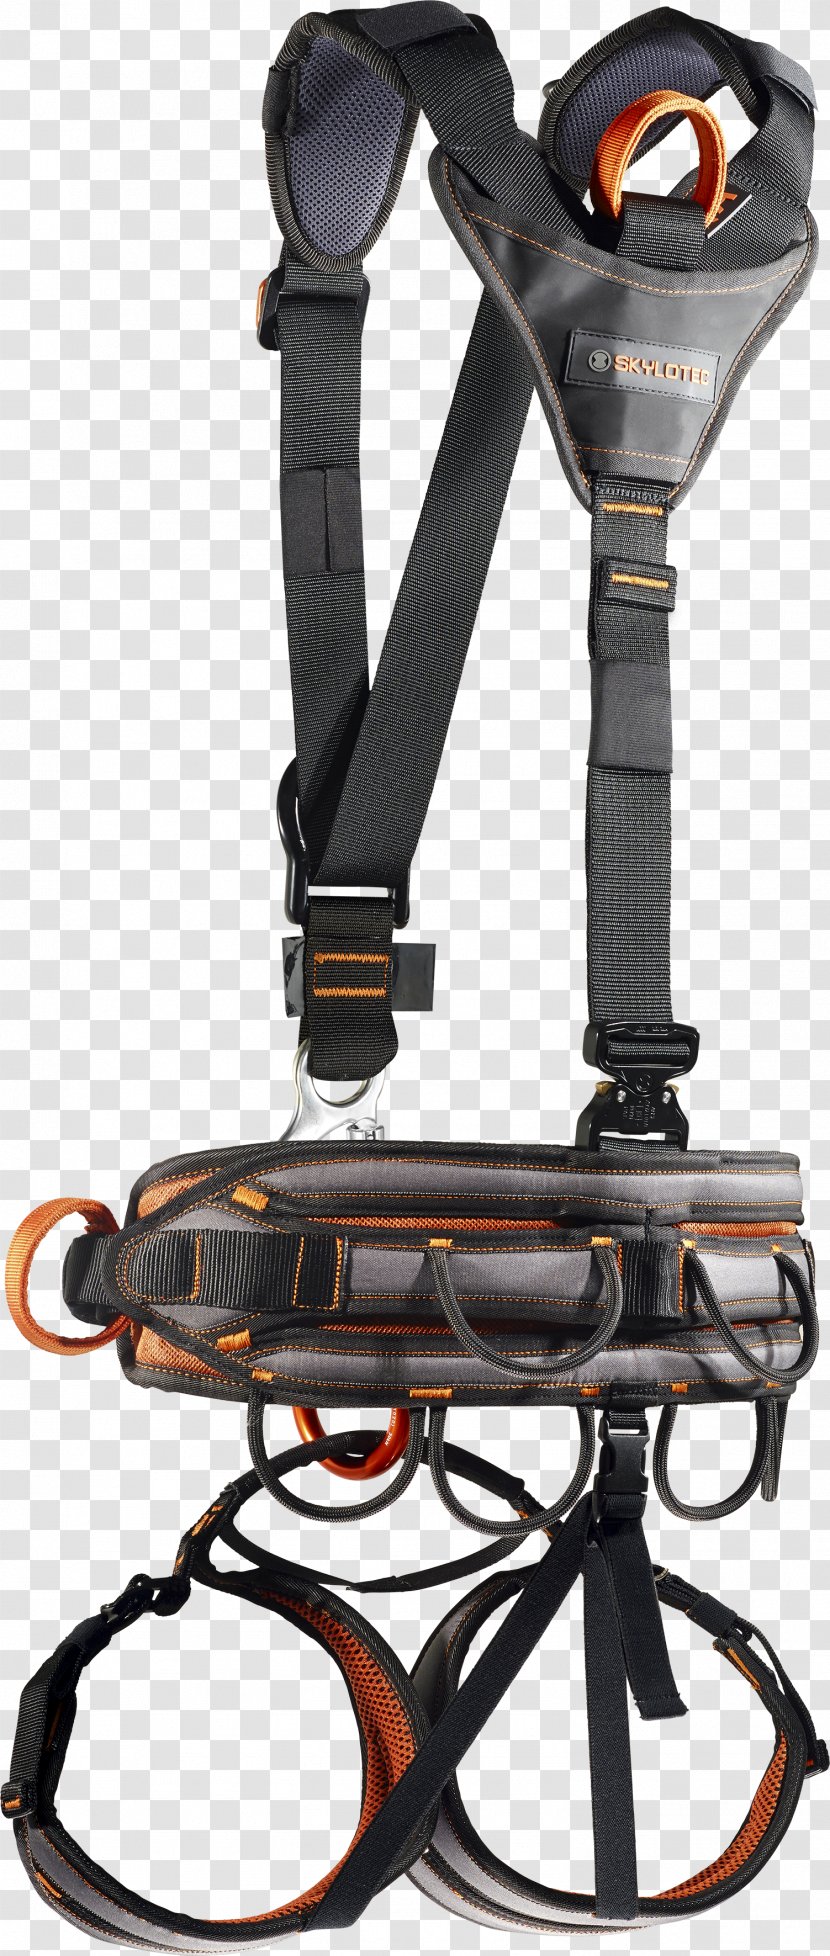 Climbing Harnesses SKYLOTEC Personal Protective Equipment Ignite Proton - Belt - Technical Application Transparent PNG